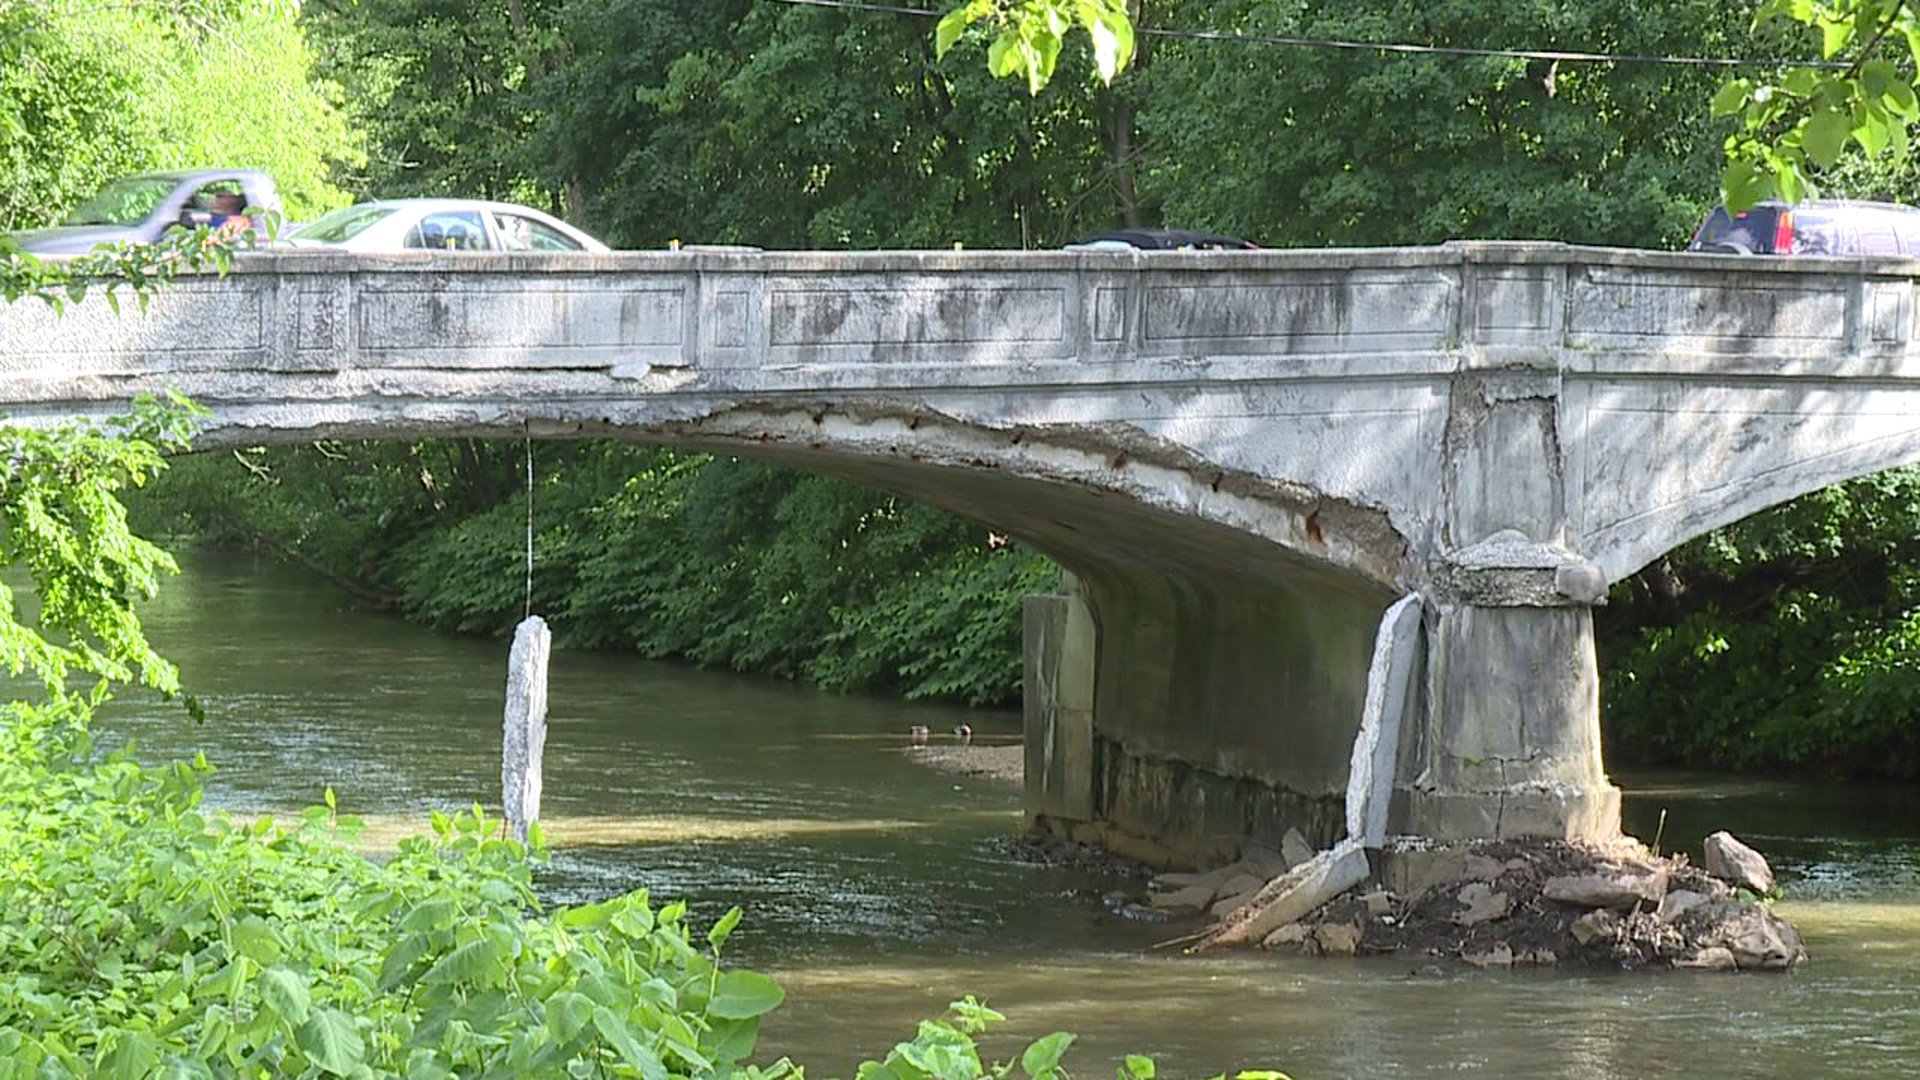 Crumbling Bridge in Schuylkill Haven Causing Concern | WNEP.com